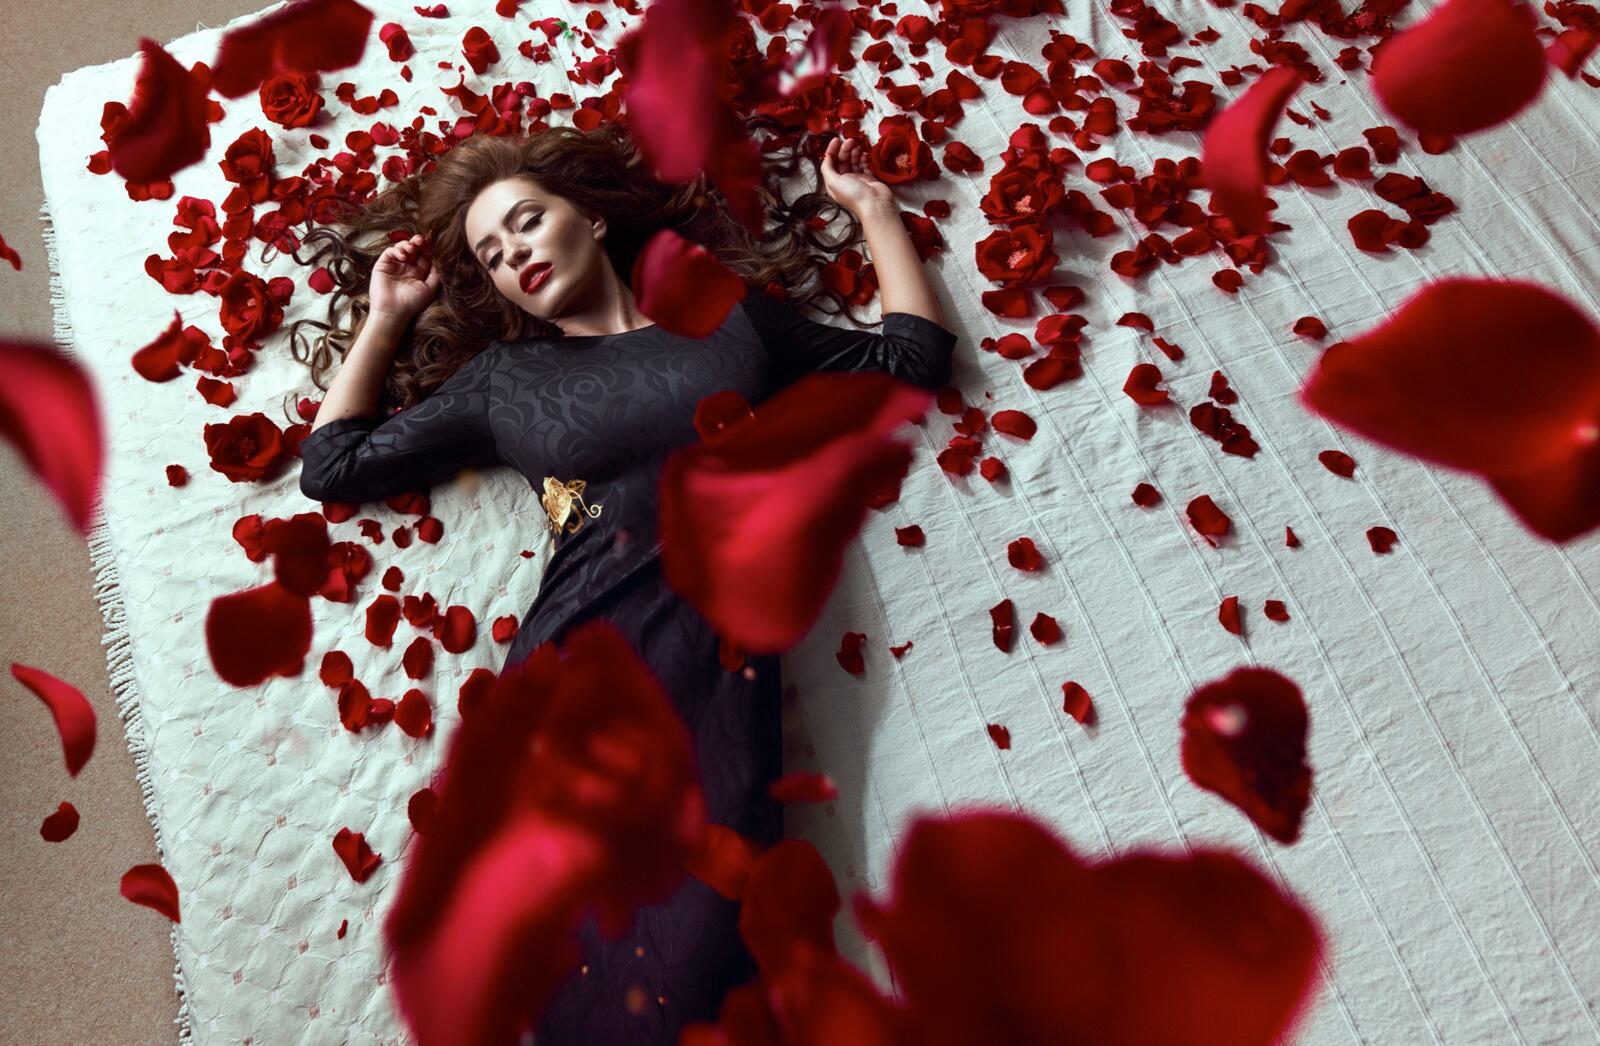 Free photo A girl in a black dress under red rose petals